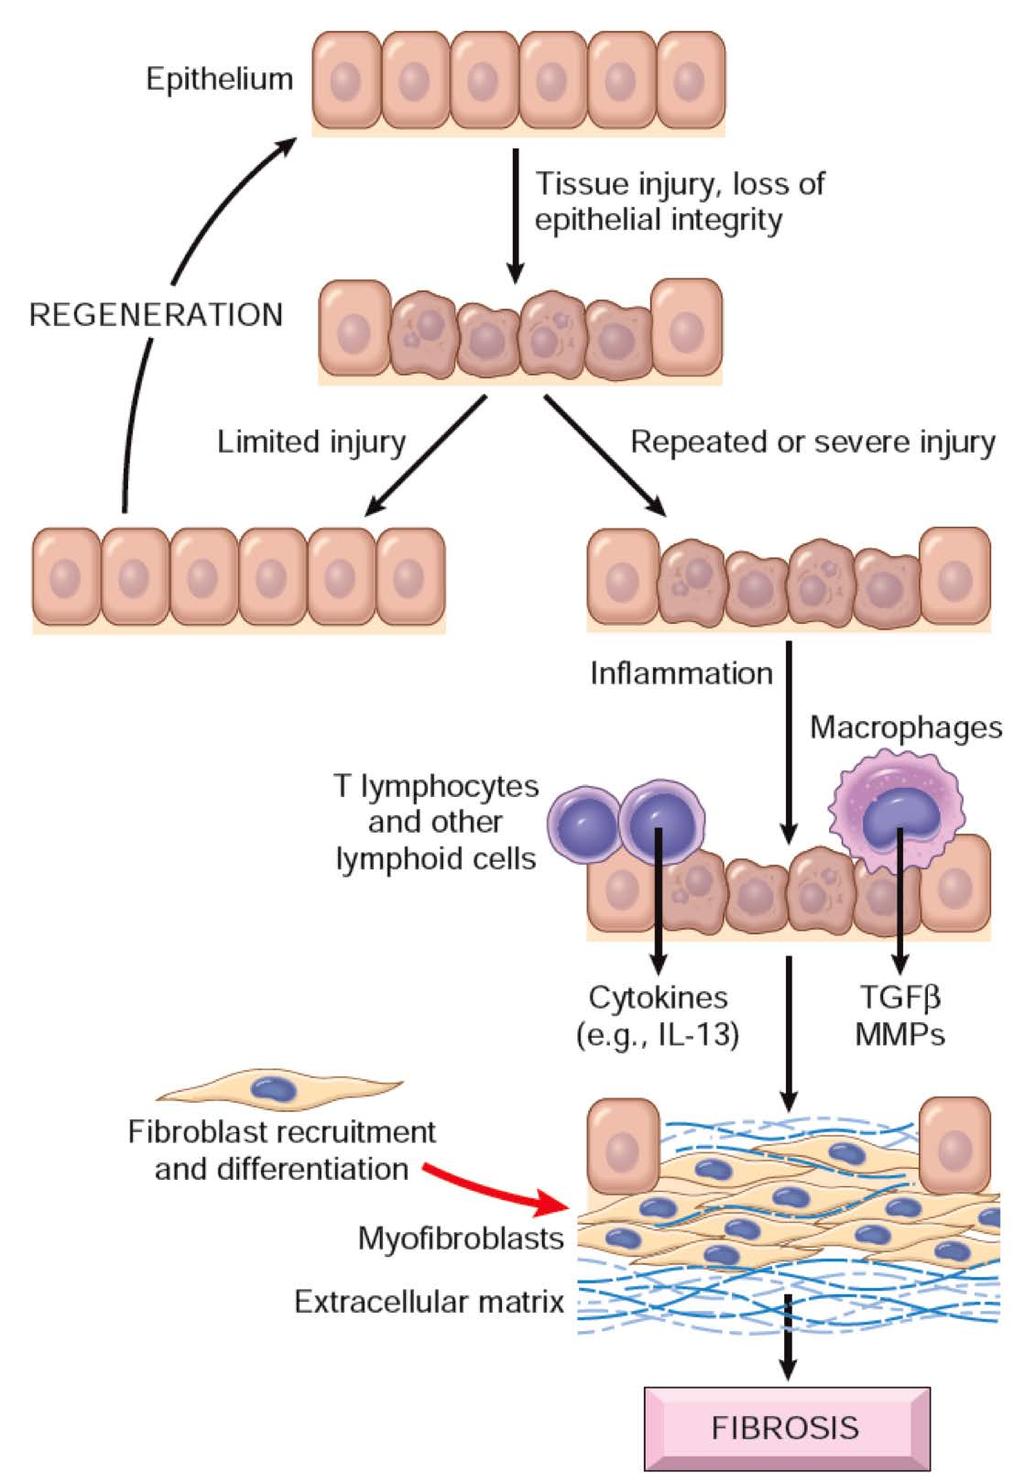 Cytokines produced by macrophages M2 and other leukocytes stimulate the migration and